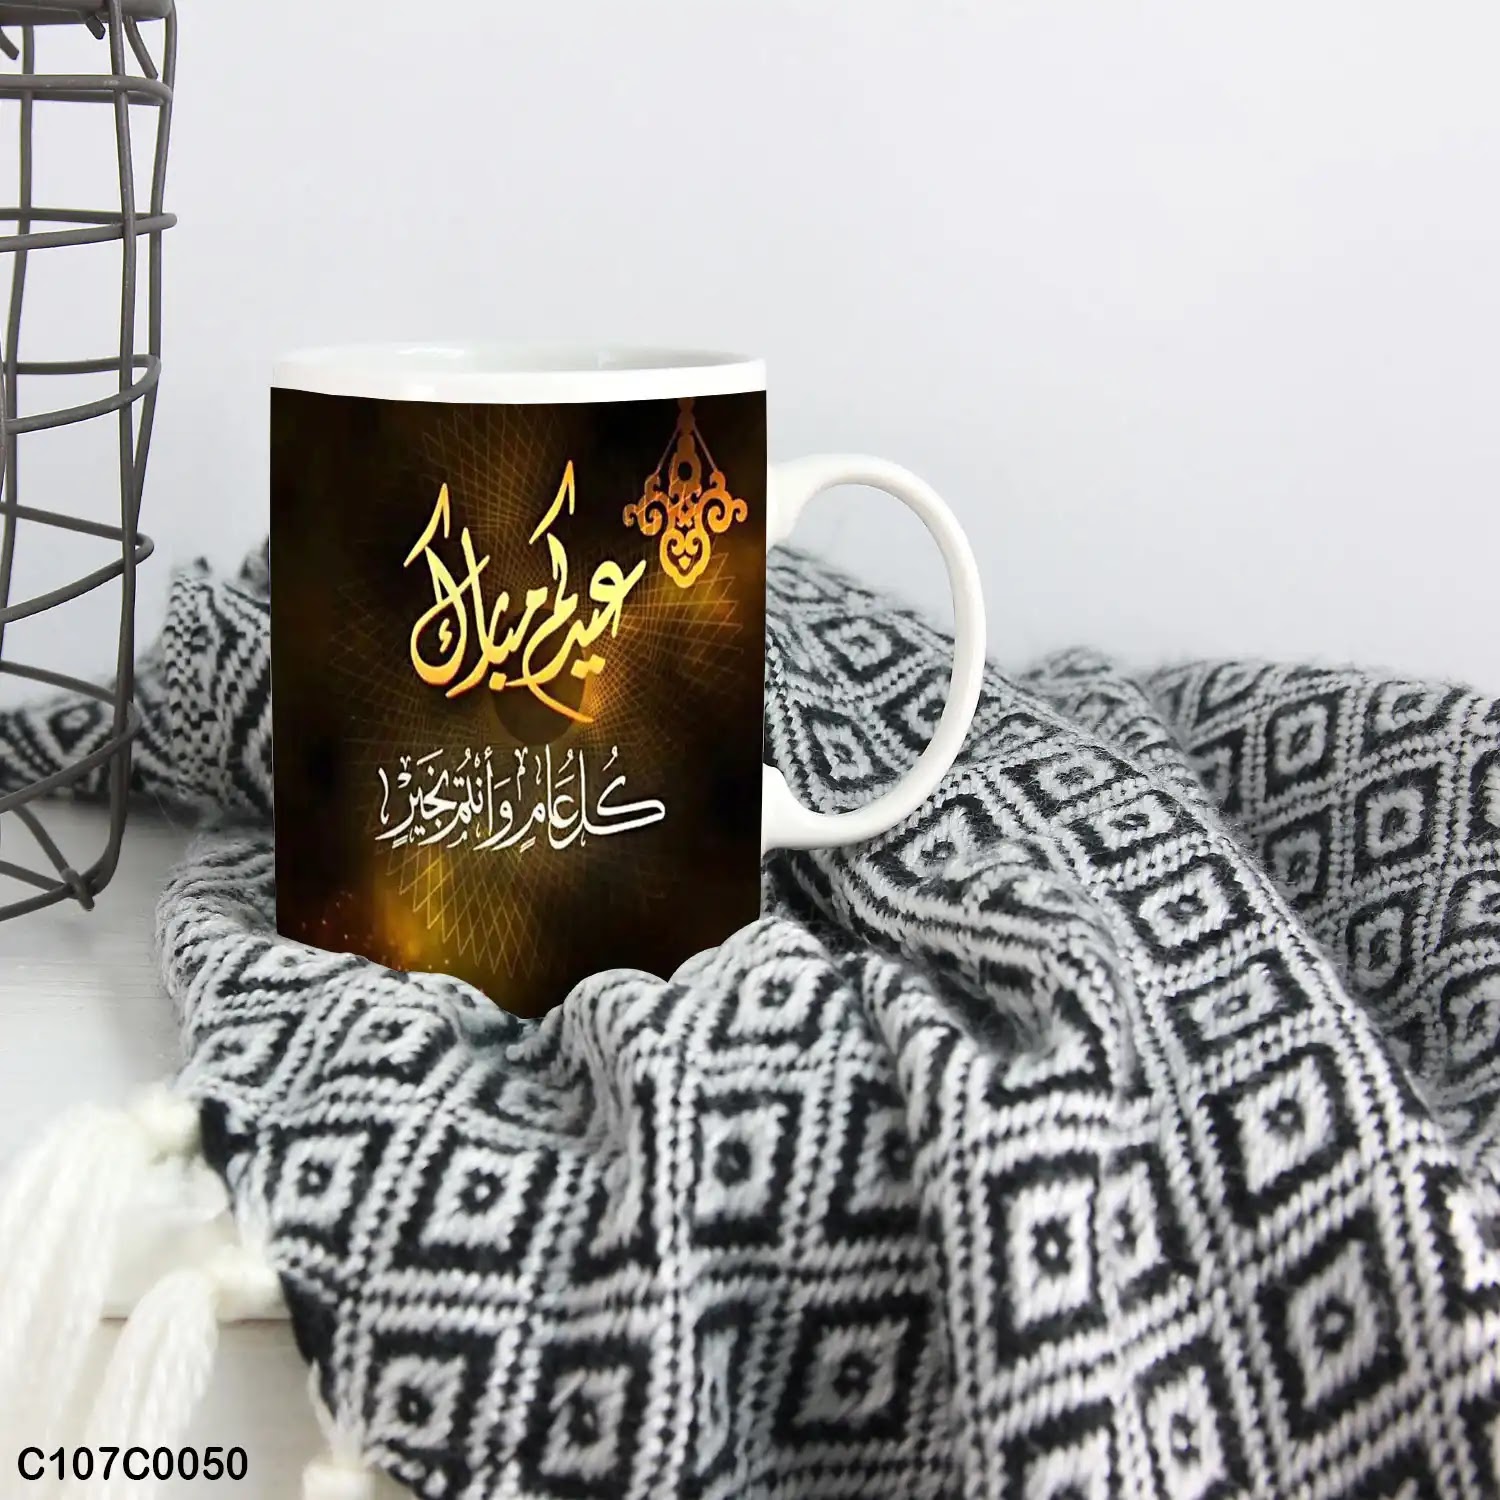 A brown and gold mug (cup) printed with "Eid Mubarak"